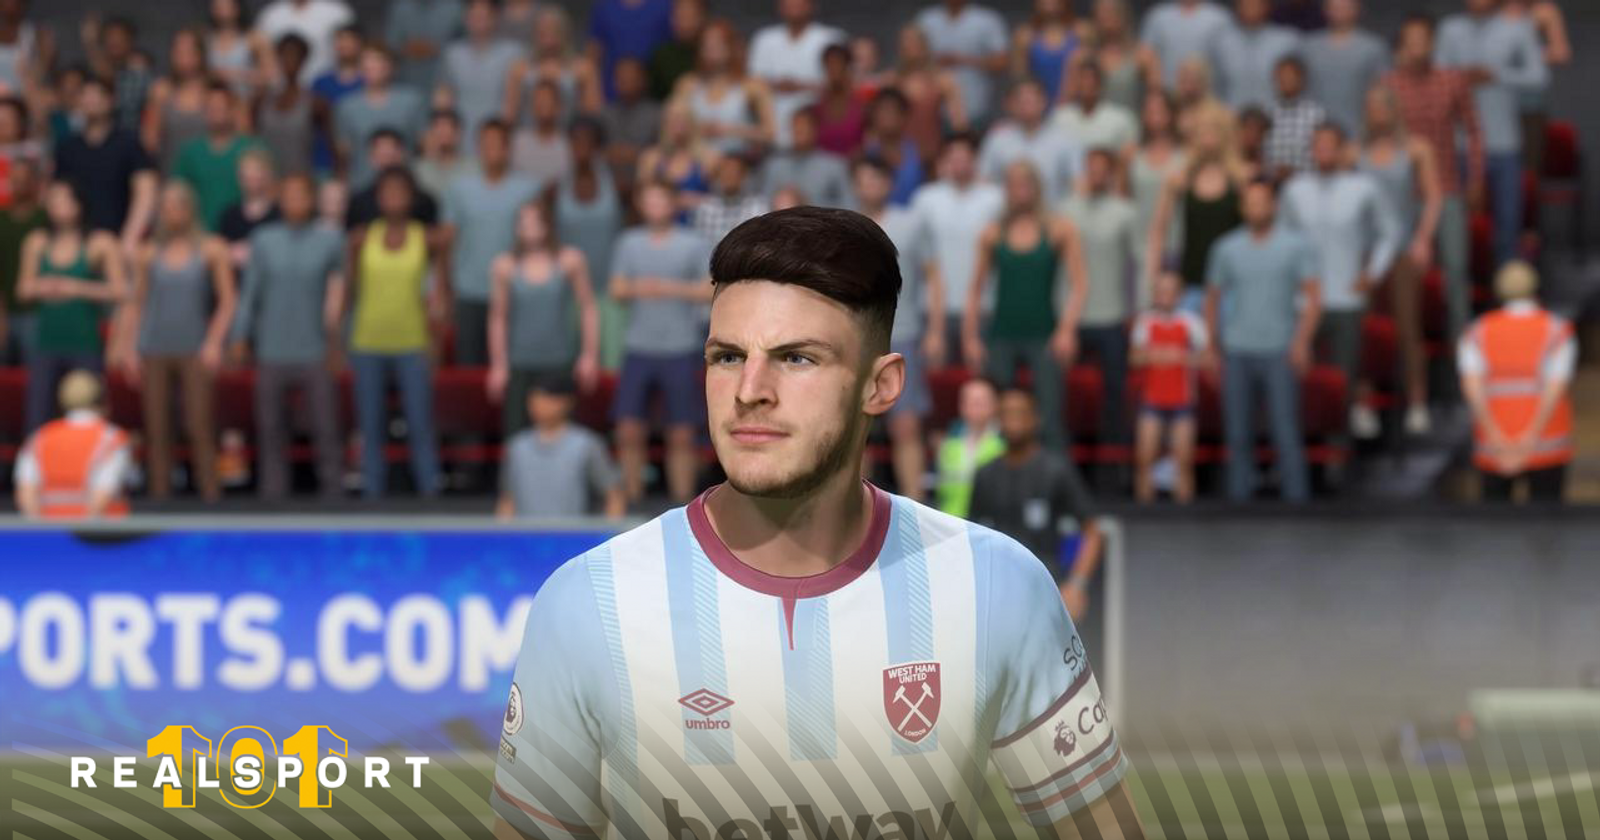 Fifa 23 is Now Available on Microsoft's xCloud Cloud Gaming